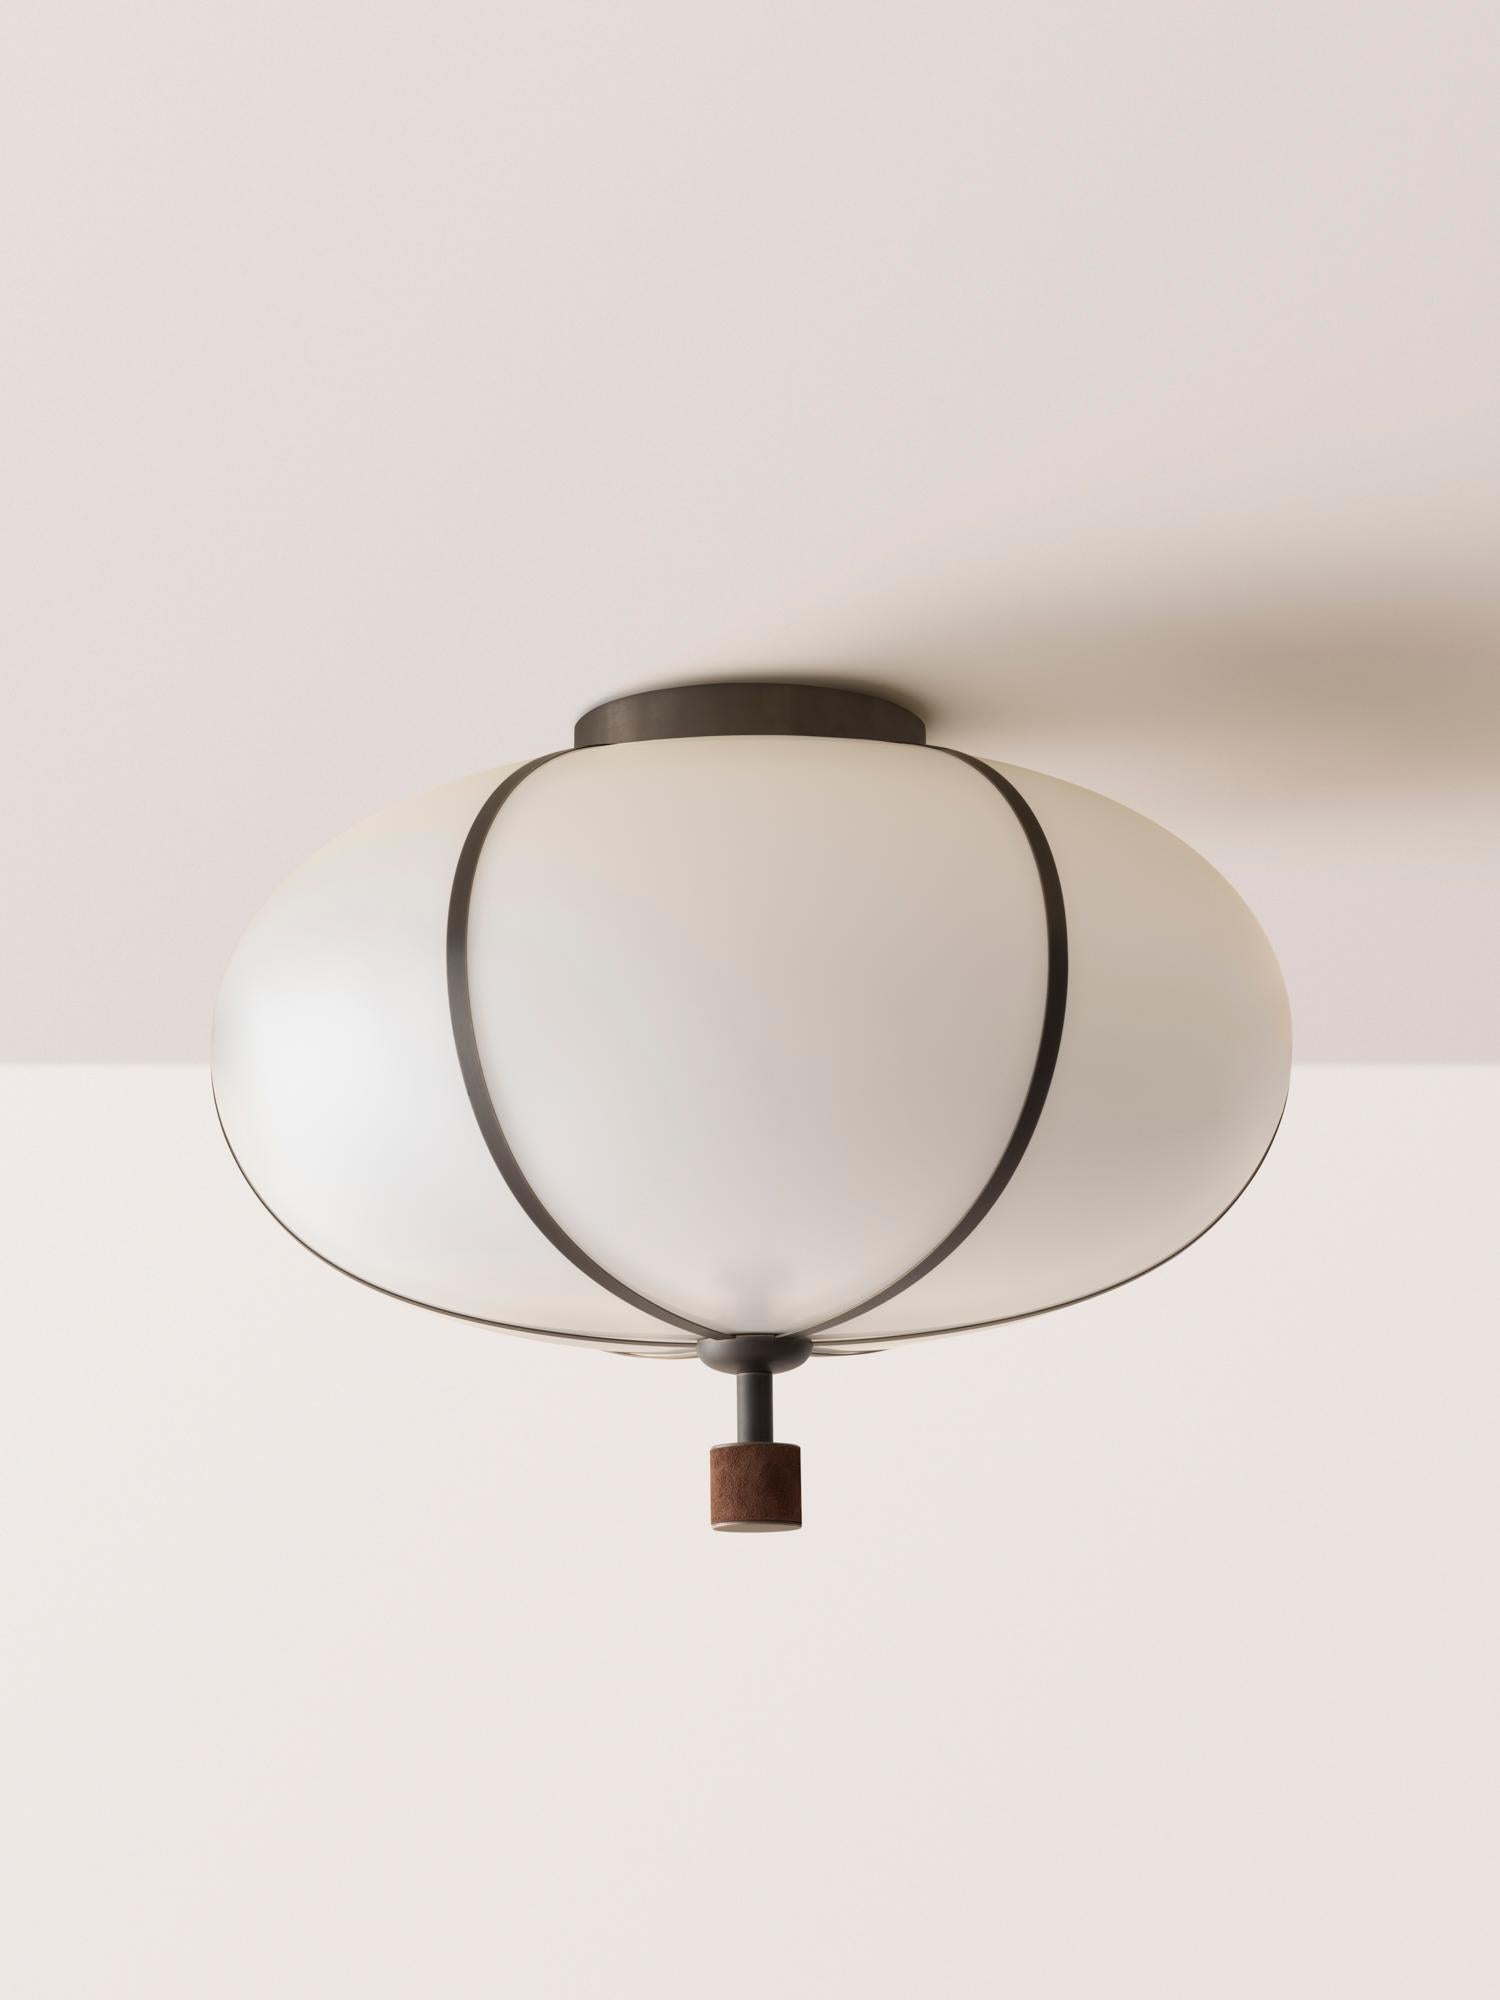 The Rib Flush Mount - Large Ellipse is blown in Italy and delicately framed by thin brass ribs. A cylindrical brass finial, with optional hand-wrapped leather or suede, elongates the fixture and adds a finishing touch of refinement.

This listing is